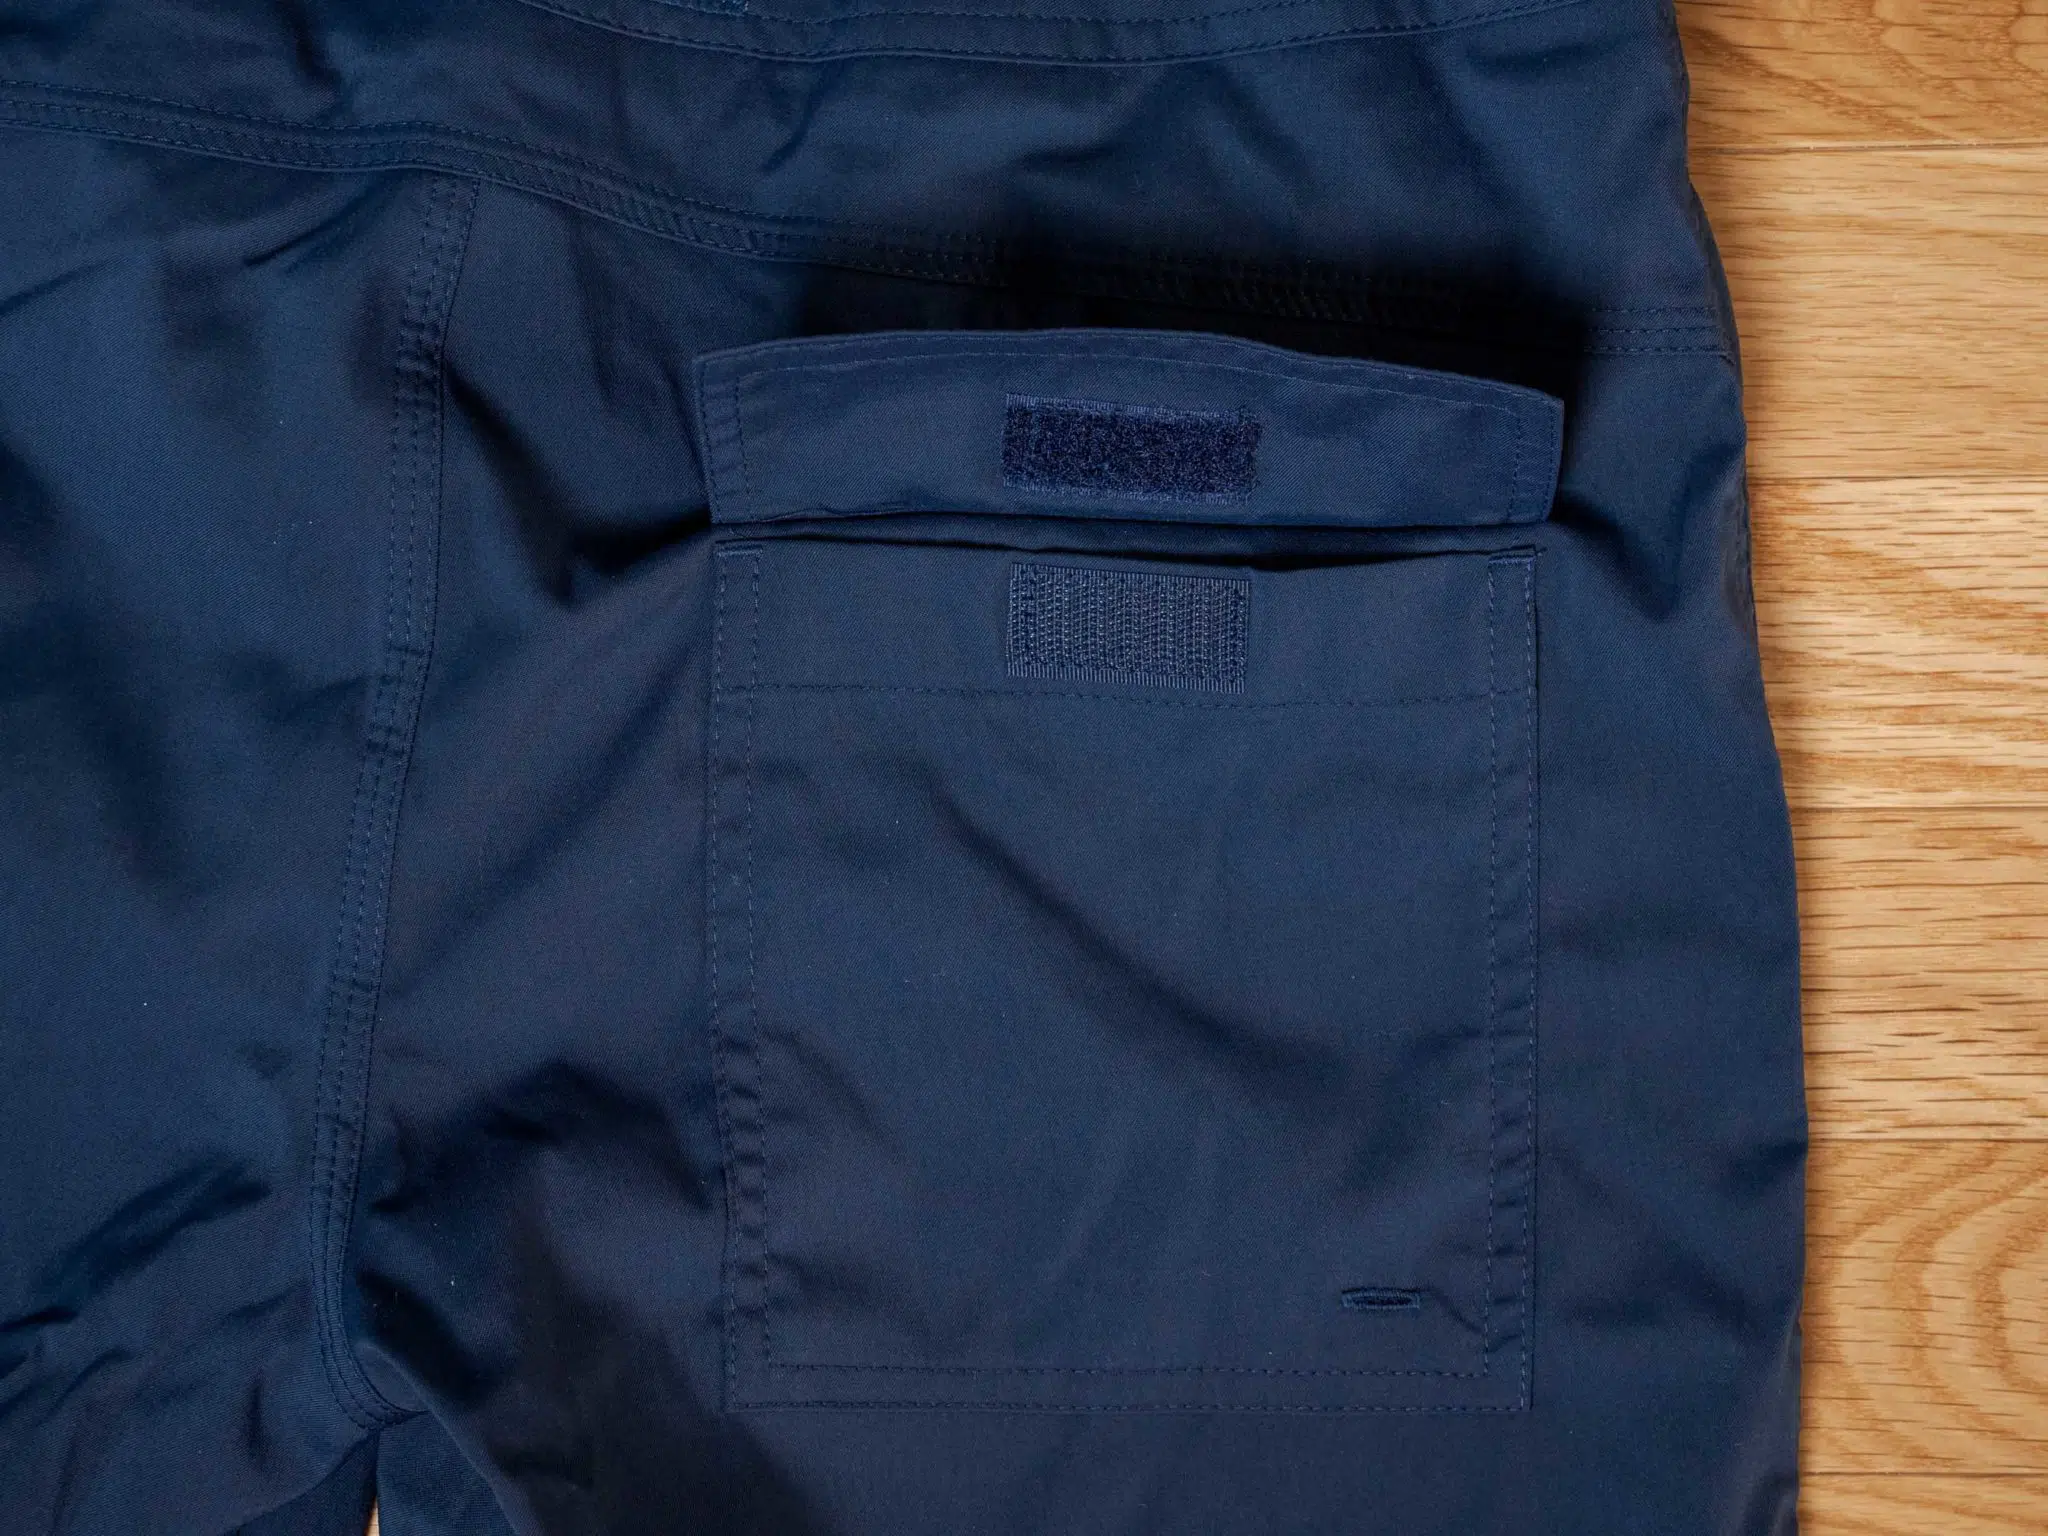 Vilebrequin Swim Trunks Review: Are They Worth $270?